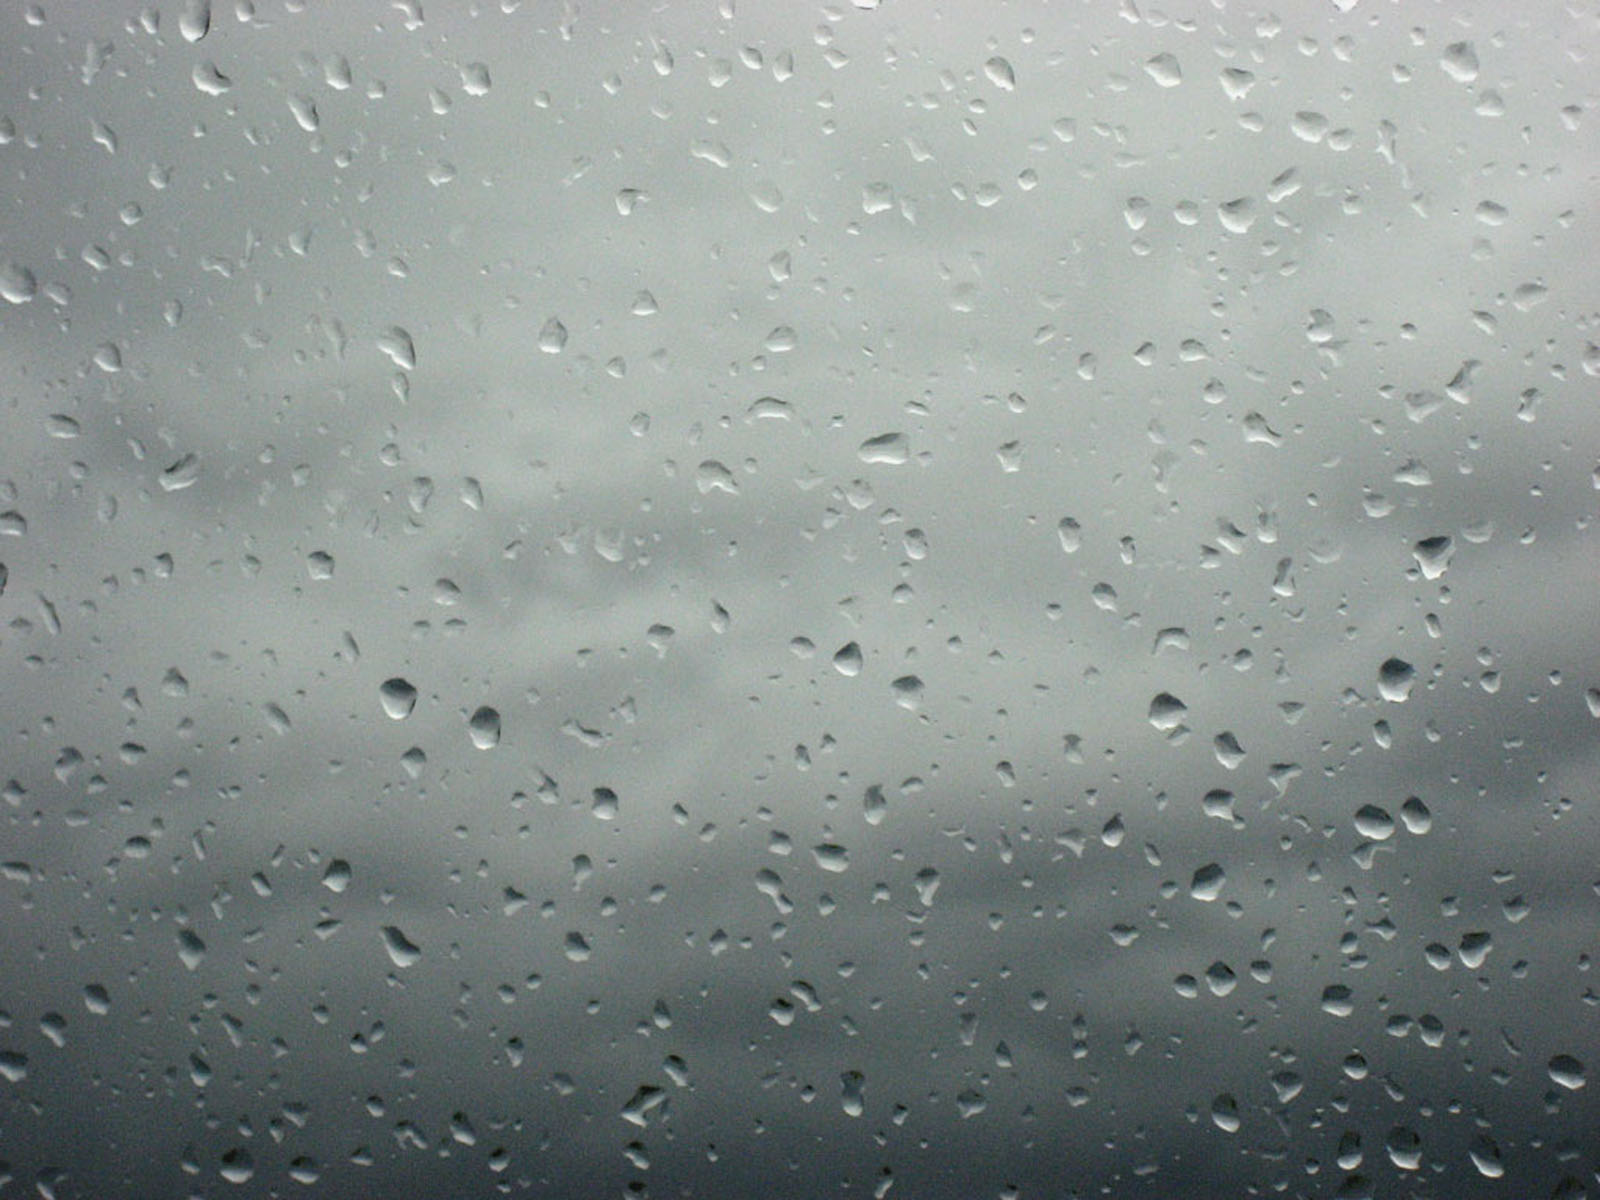 Rain Drops On Glass Wallpaper Image Photos And Pictures For